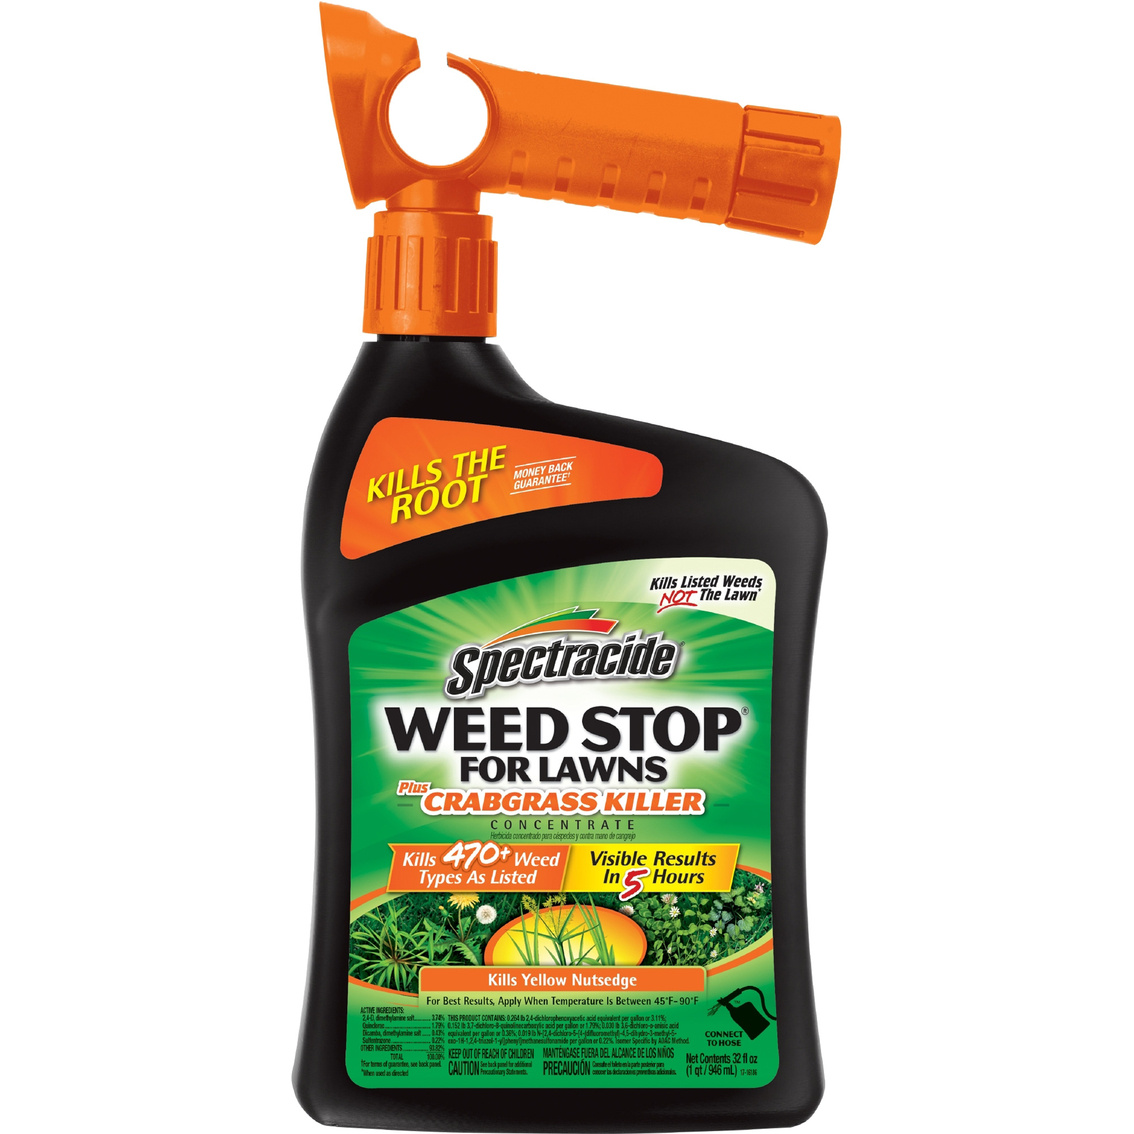 Spectracide Weed Stop for Lawns Plus Crabgrass Killer Ready-To-Spray